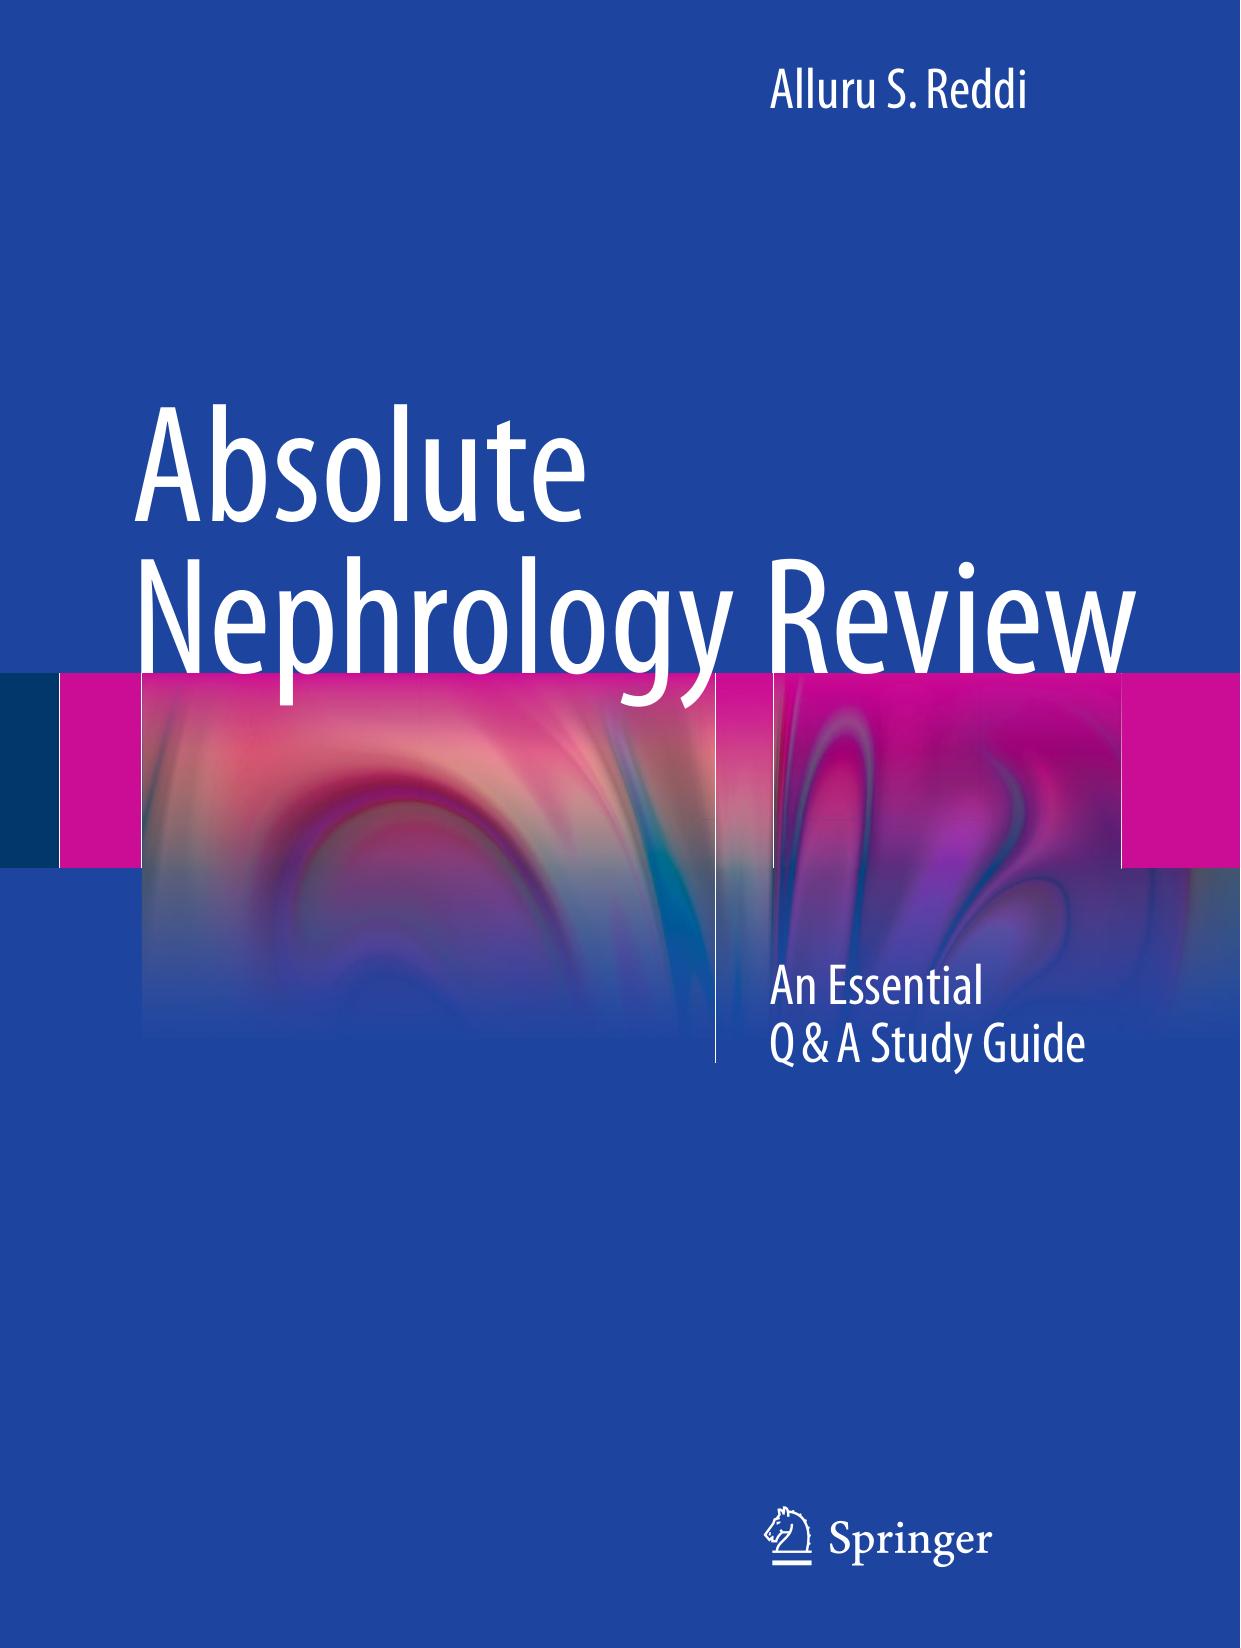 Absolute Nephrology Review  An Essential Q & A Study Guide 2016